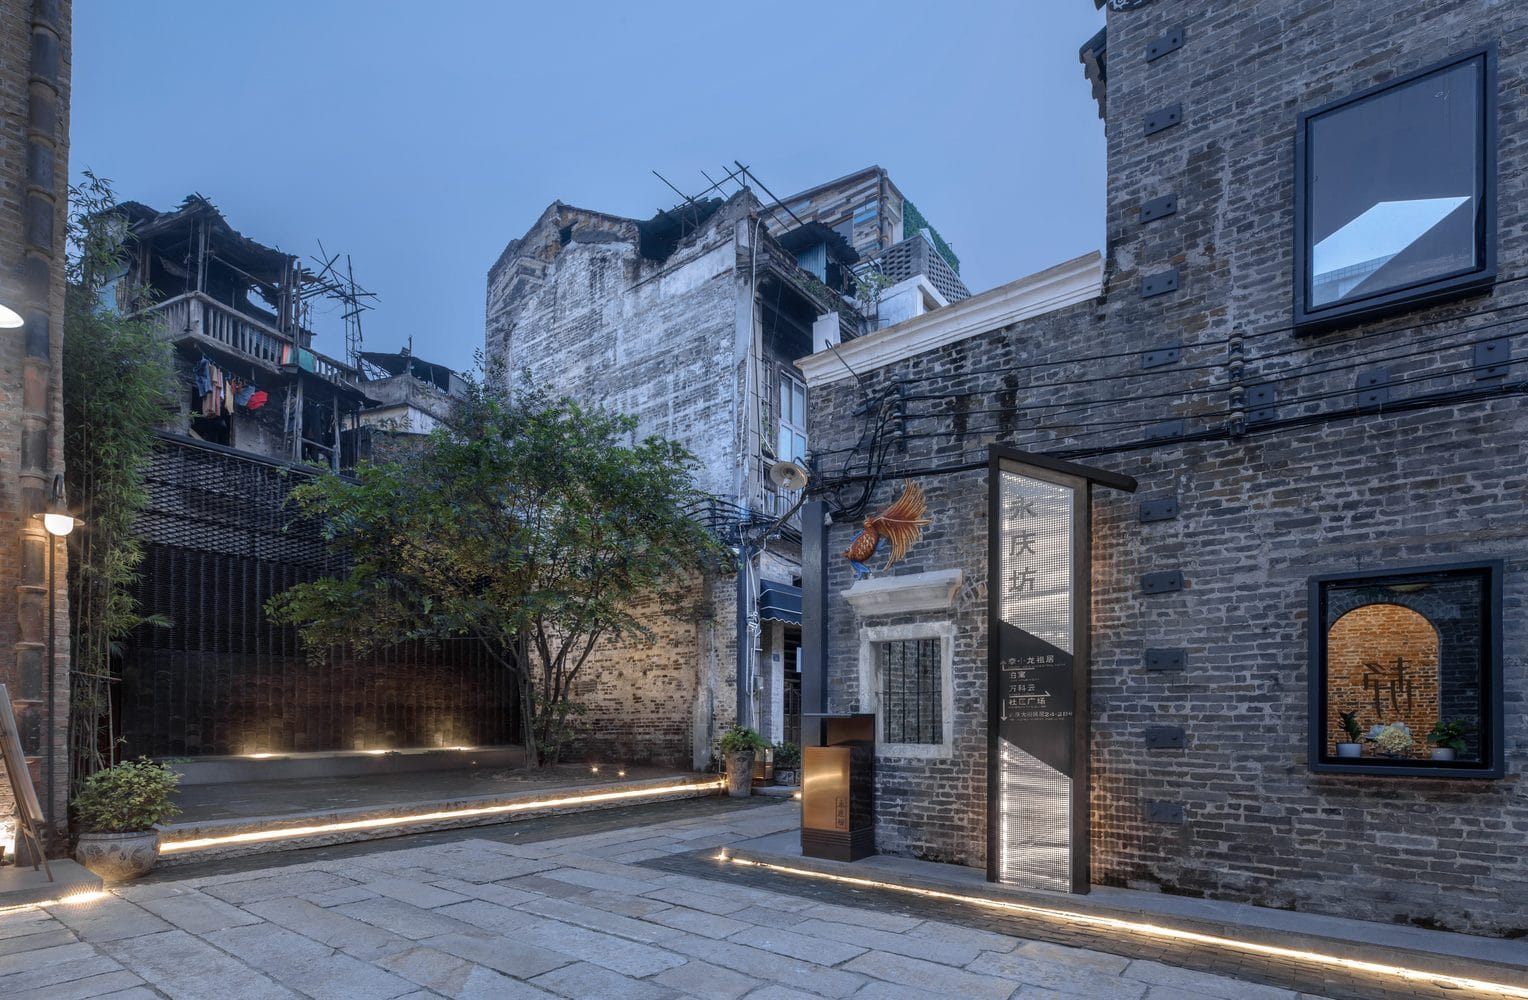 One Day, a Project: Renovation of Yongqing Fang in Enning Road District by Lab D+H